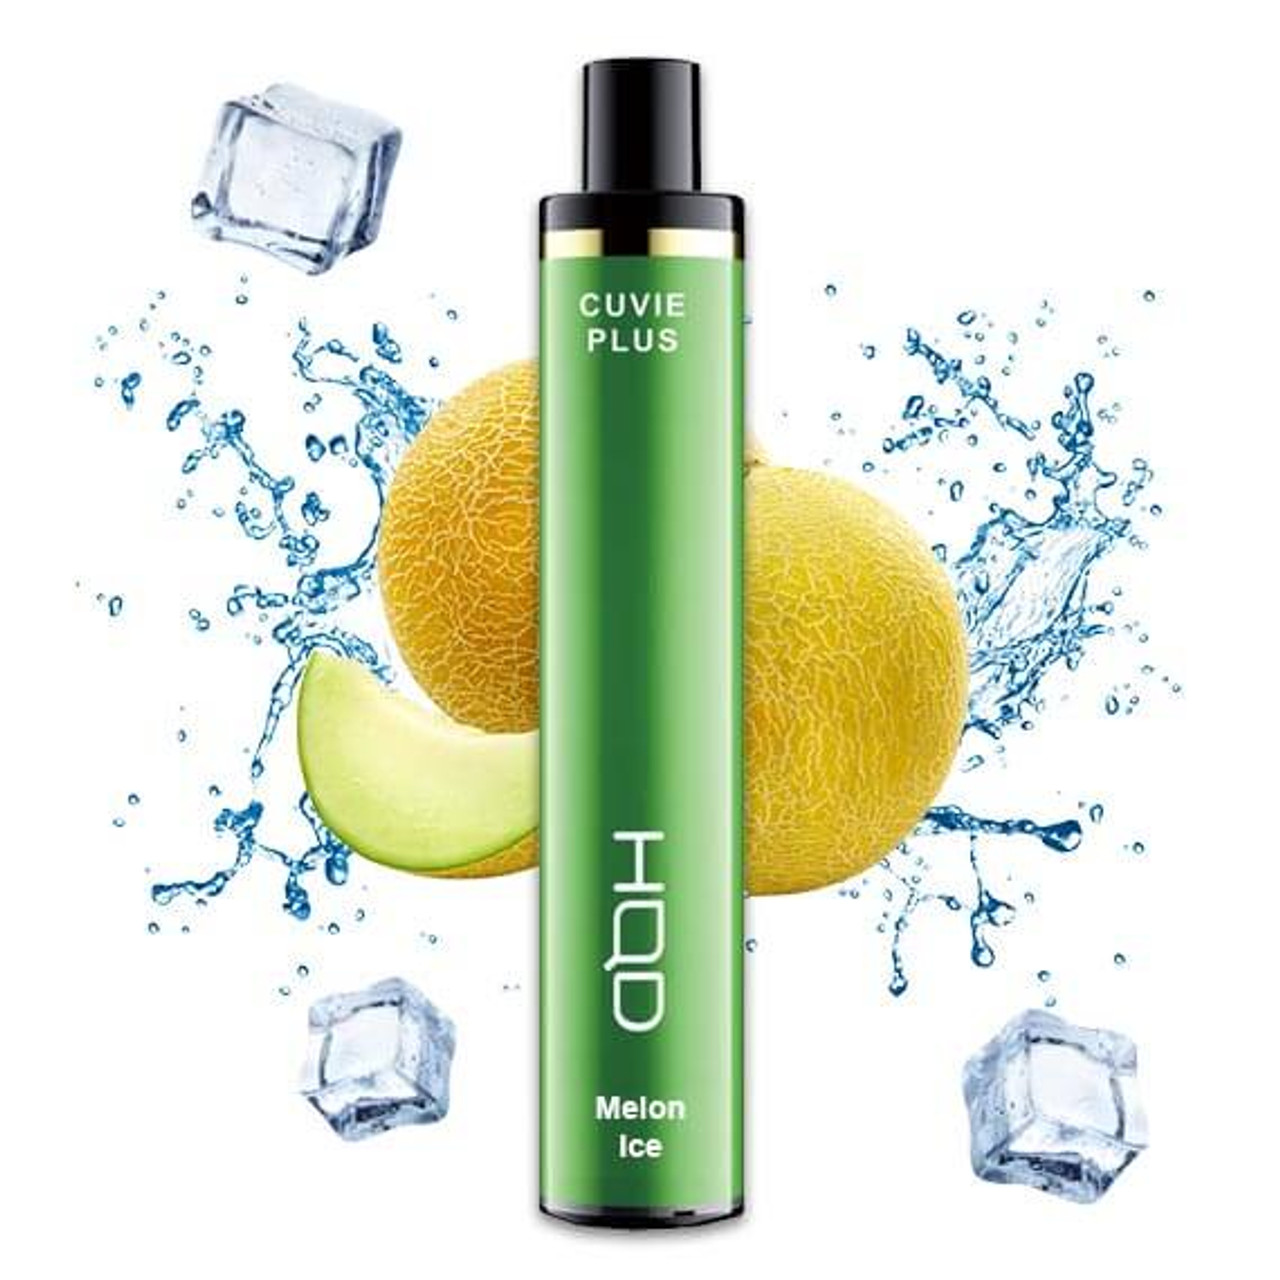 Experience the Freeze: HQD Cuvie Plus Melon Ice 1200 Puffs Device